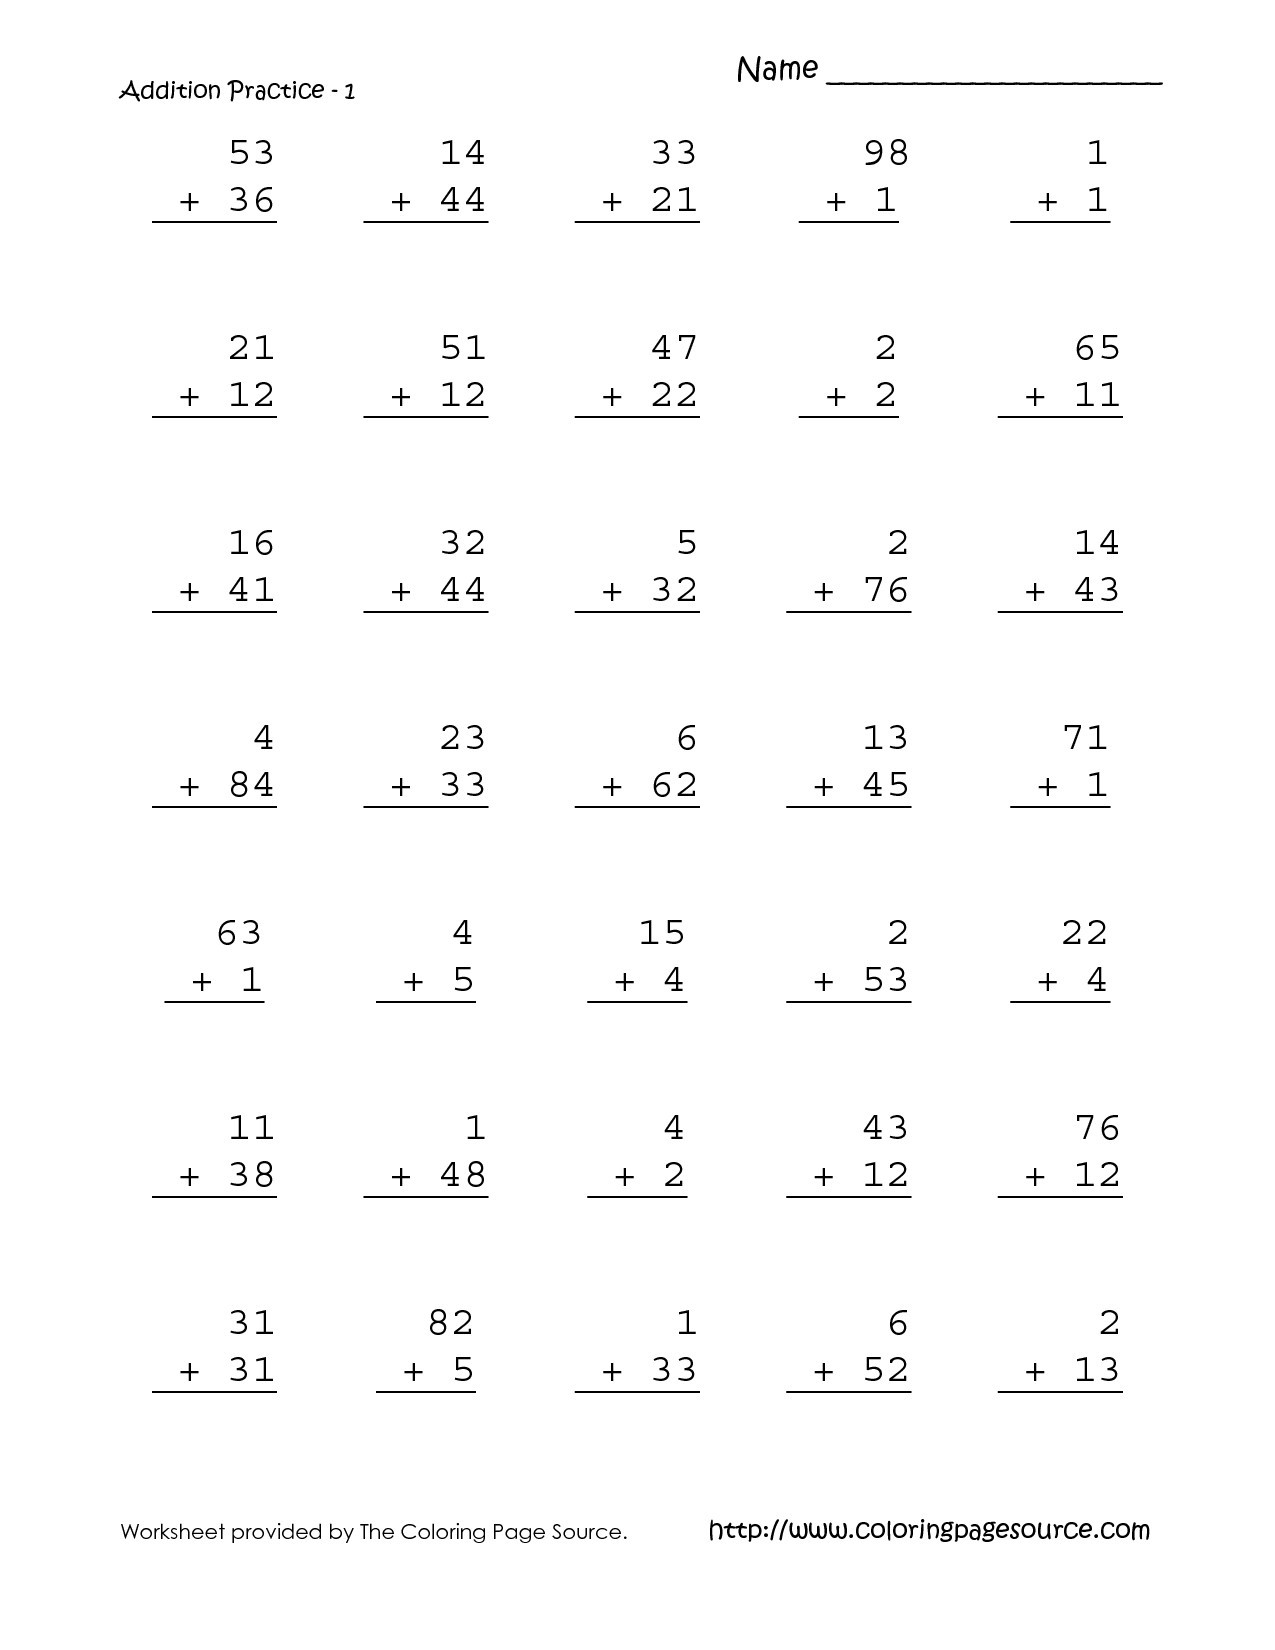 4-free-math-worksheets-second-grade-2-addition-adding-whole-tens-3